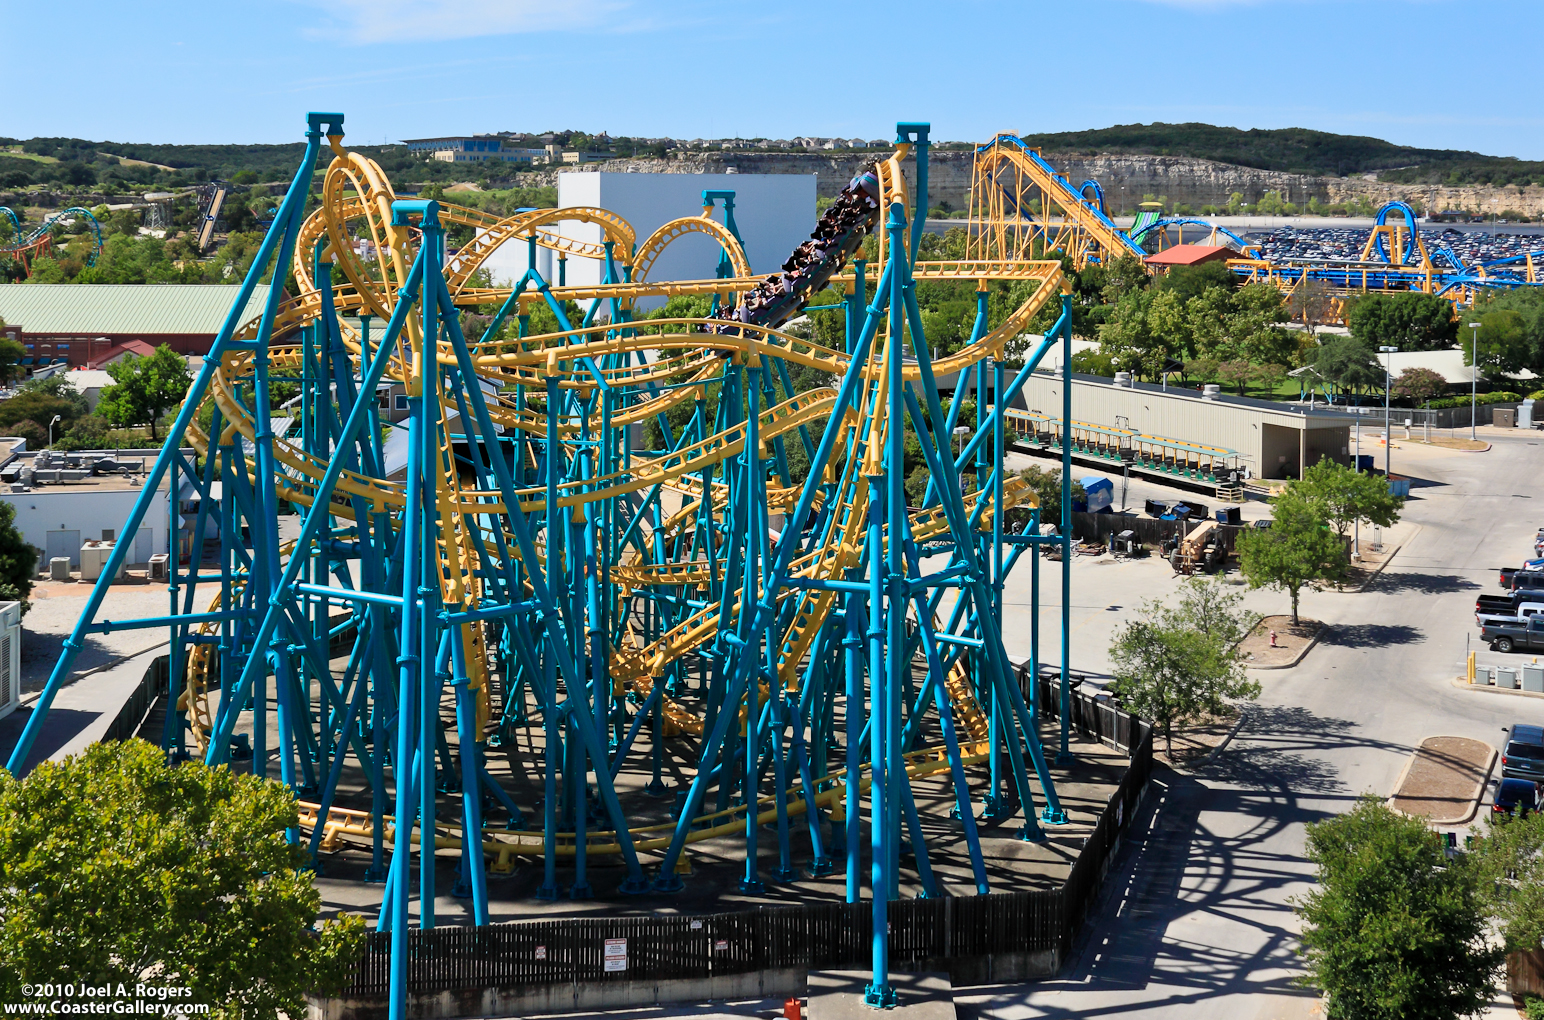 Stock image of the Poltergeist coaster built by Premier Rides